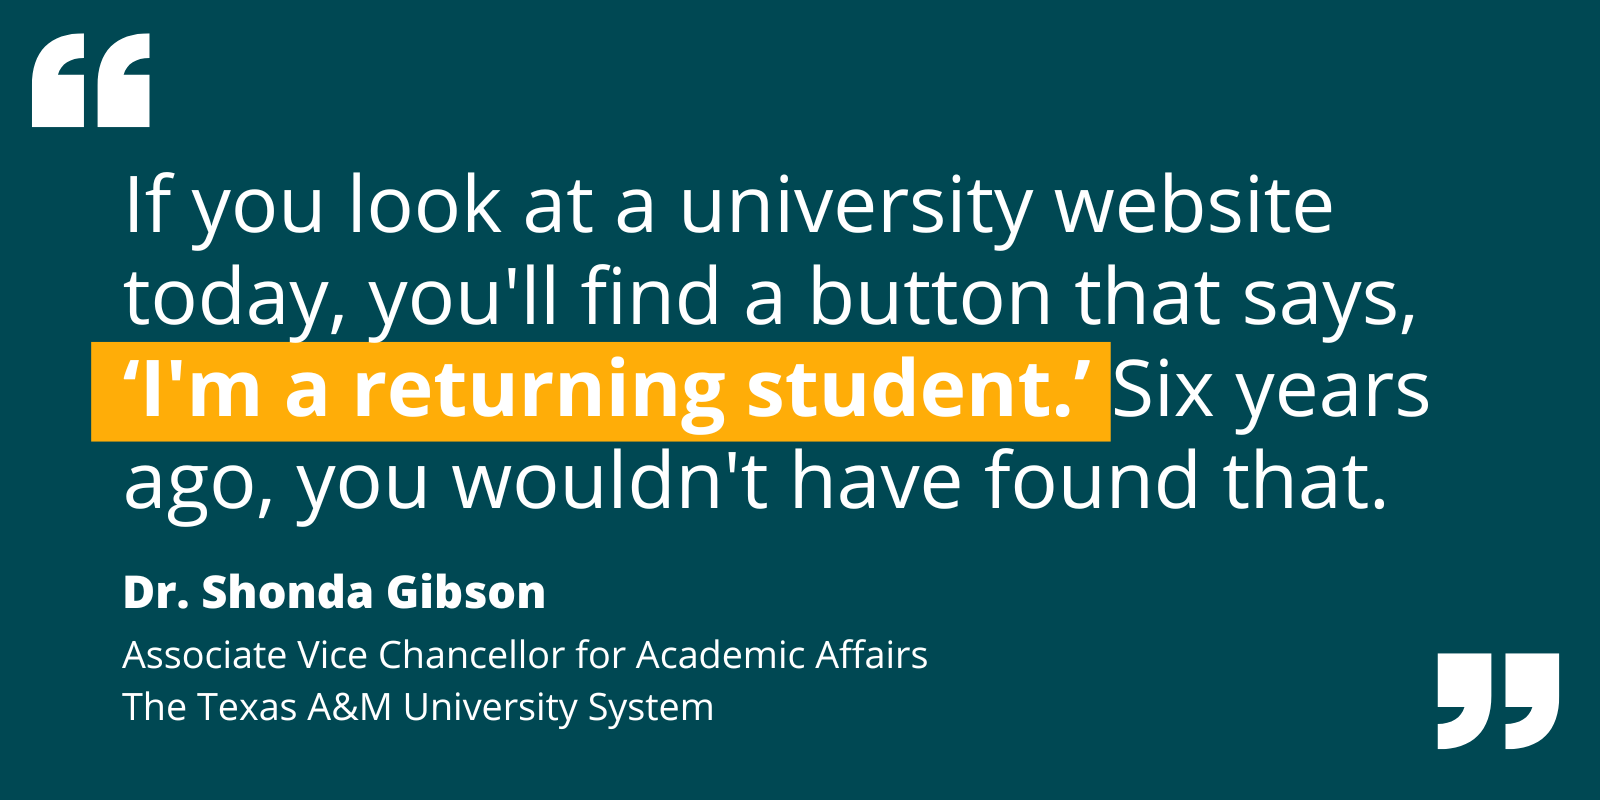 Quote from Dr Gibson: “If you look at a university website today, you'll find a button that says, ‘I'm a returning student.’ Six years ago, you wouldn't have found that.“